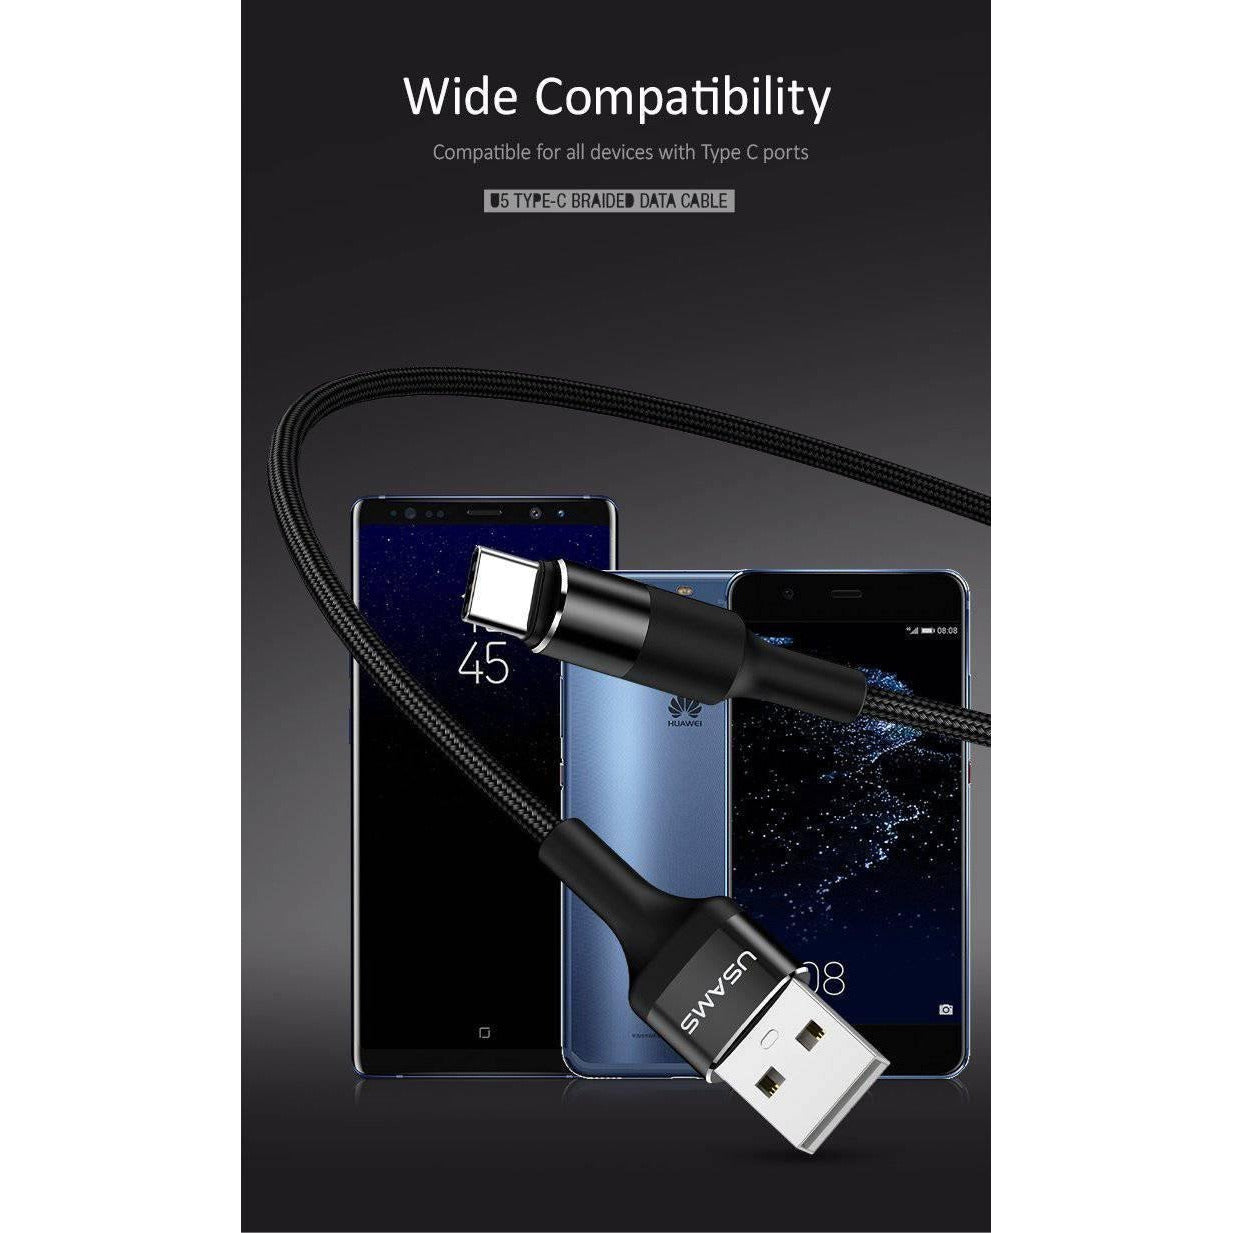 USAMS Type-C Data and Charging Cable | Shopna Online Store .